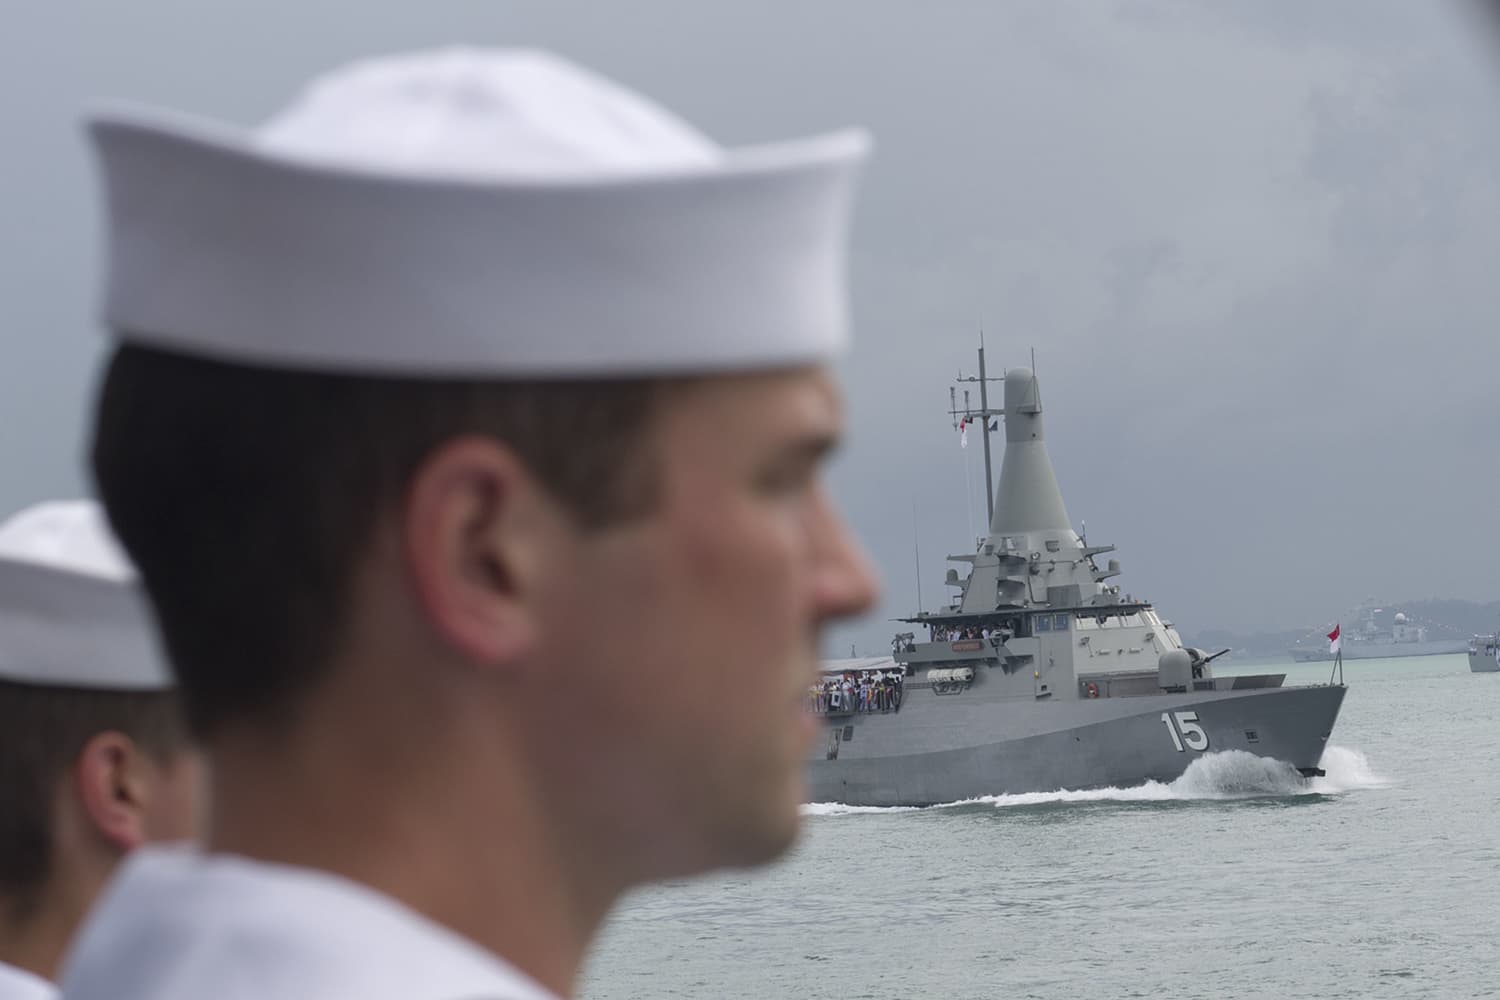 Sailors aboard the USS Sterett stand at attention as the reviewing ship passes during the International Maritime Review parade of ships off the coast of Singapore on May 15, 2017. (U.S. Navy photo by Mass Communication Specialist 1st Class Byron C. Linder/Released)